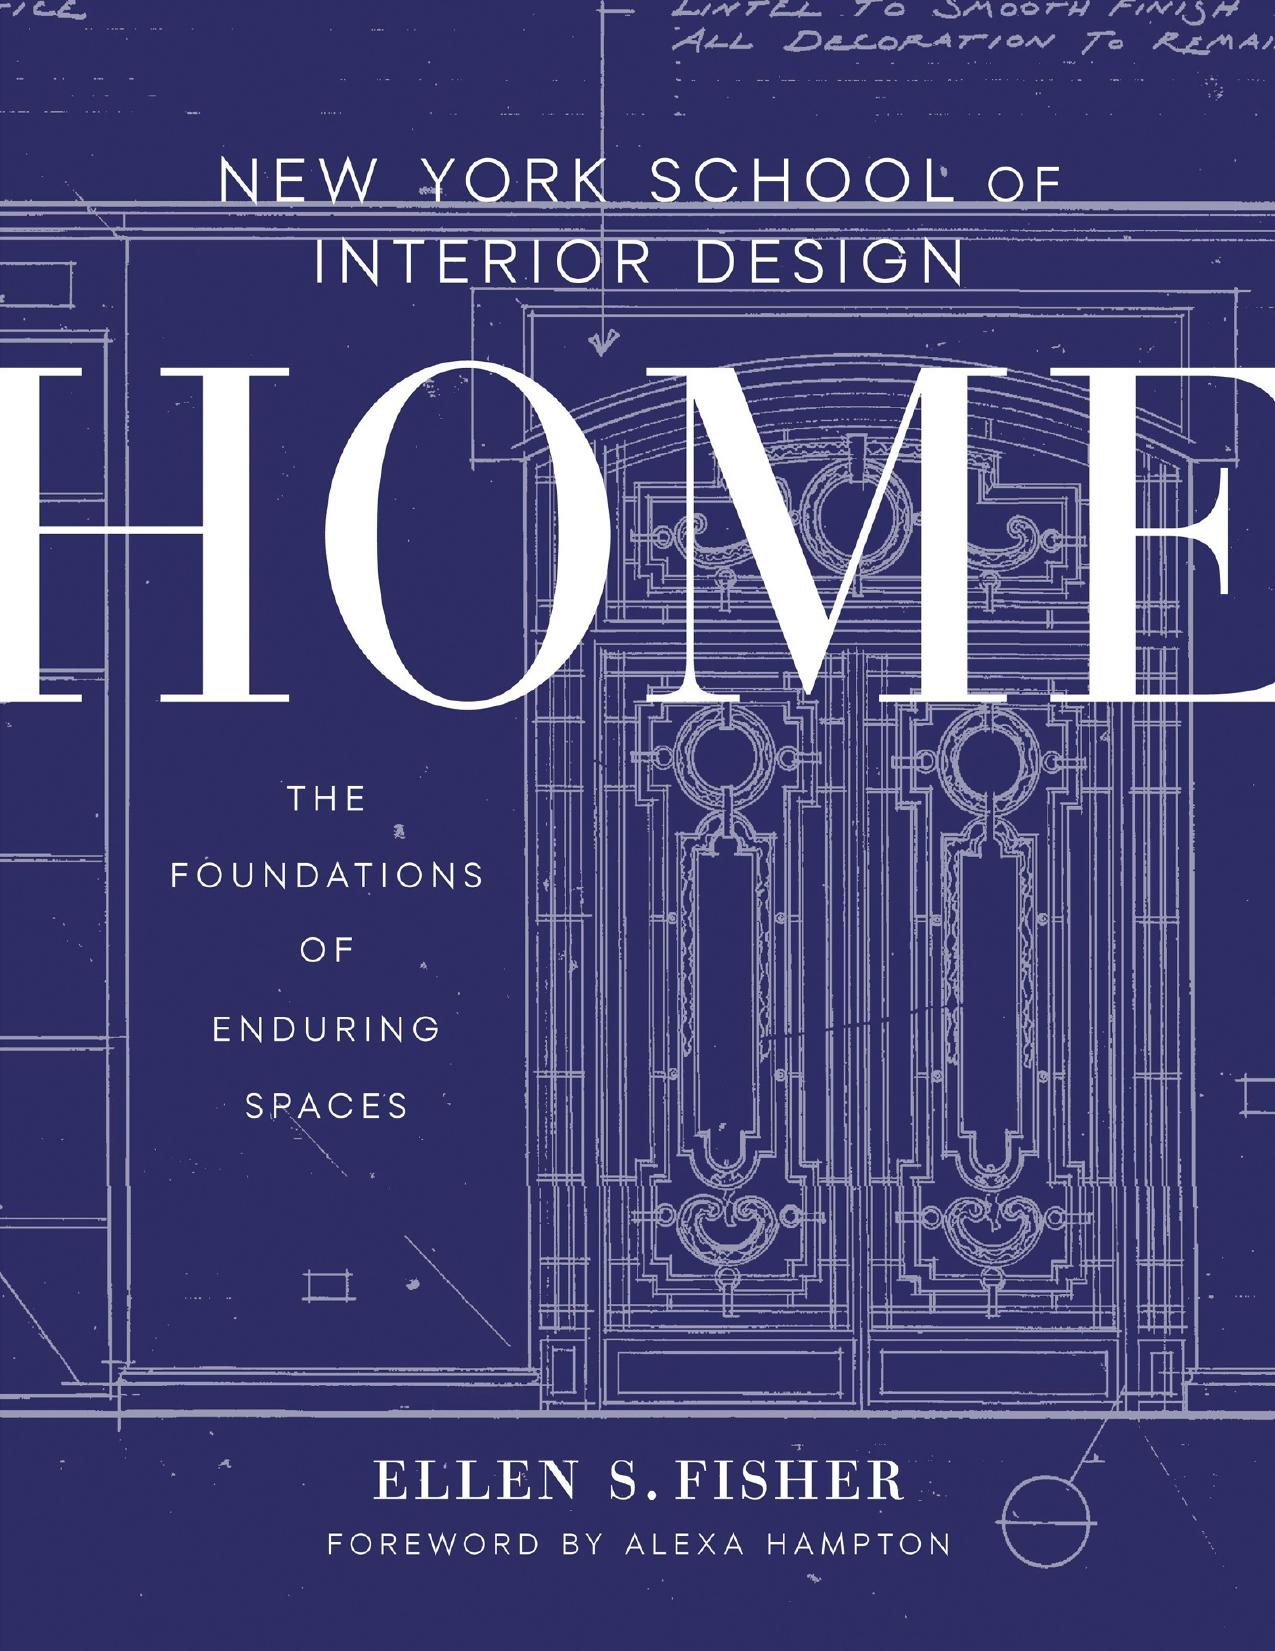 New York School of Interior Design: Home: The Foundations of Enduring Spaces - PDFDrive.com